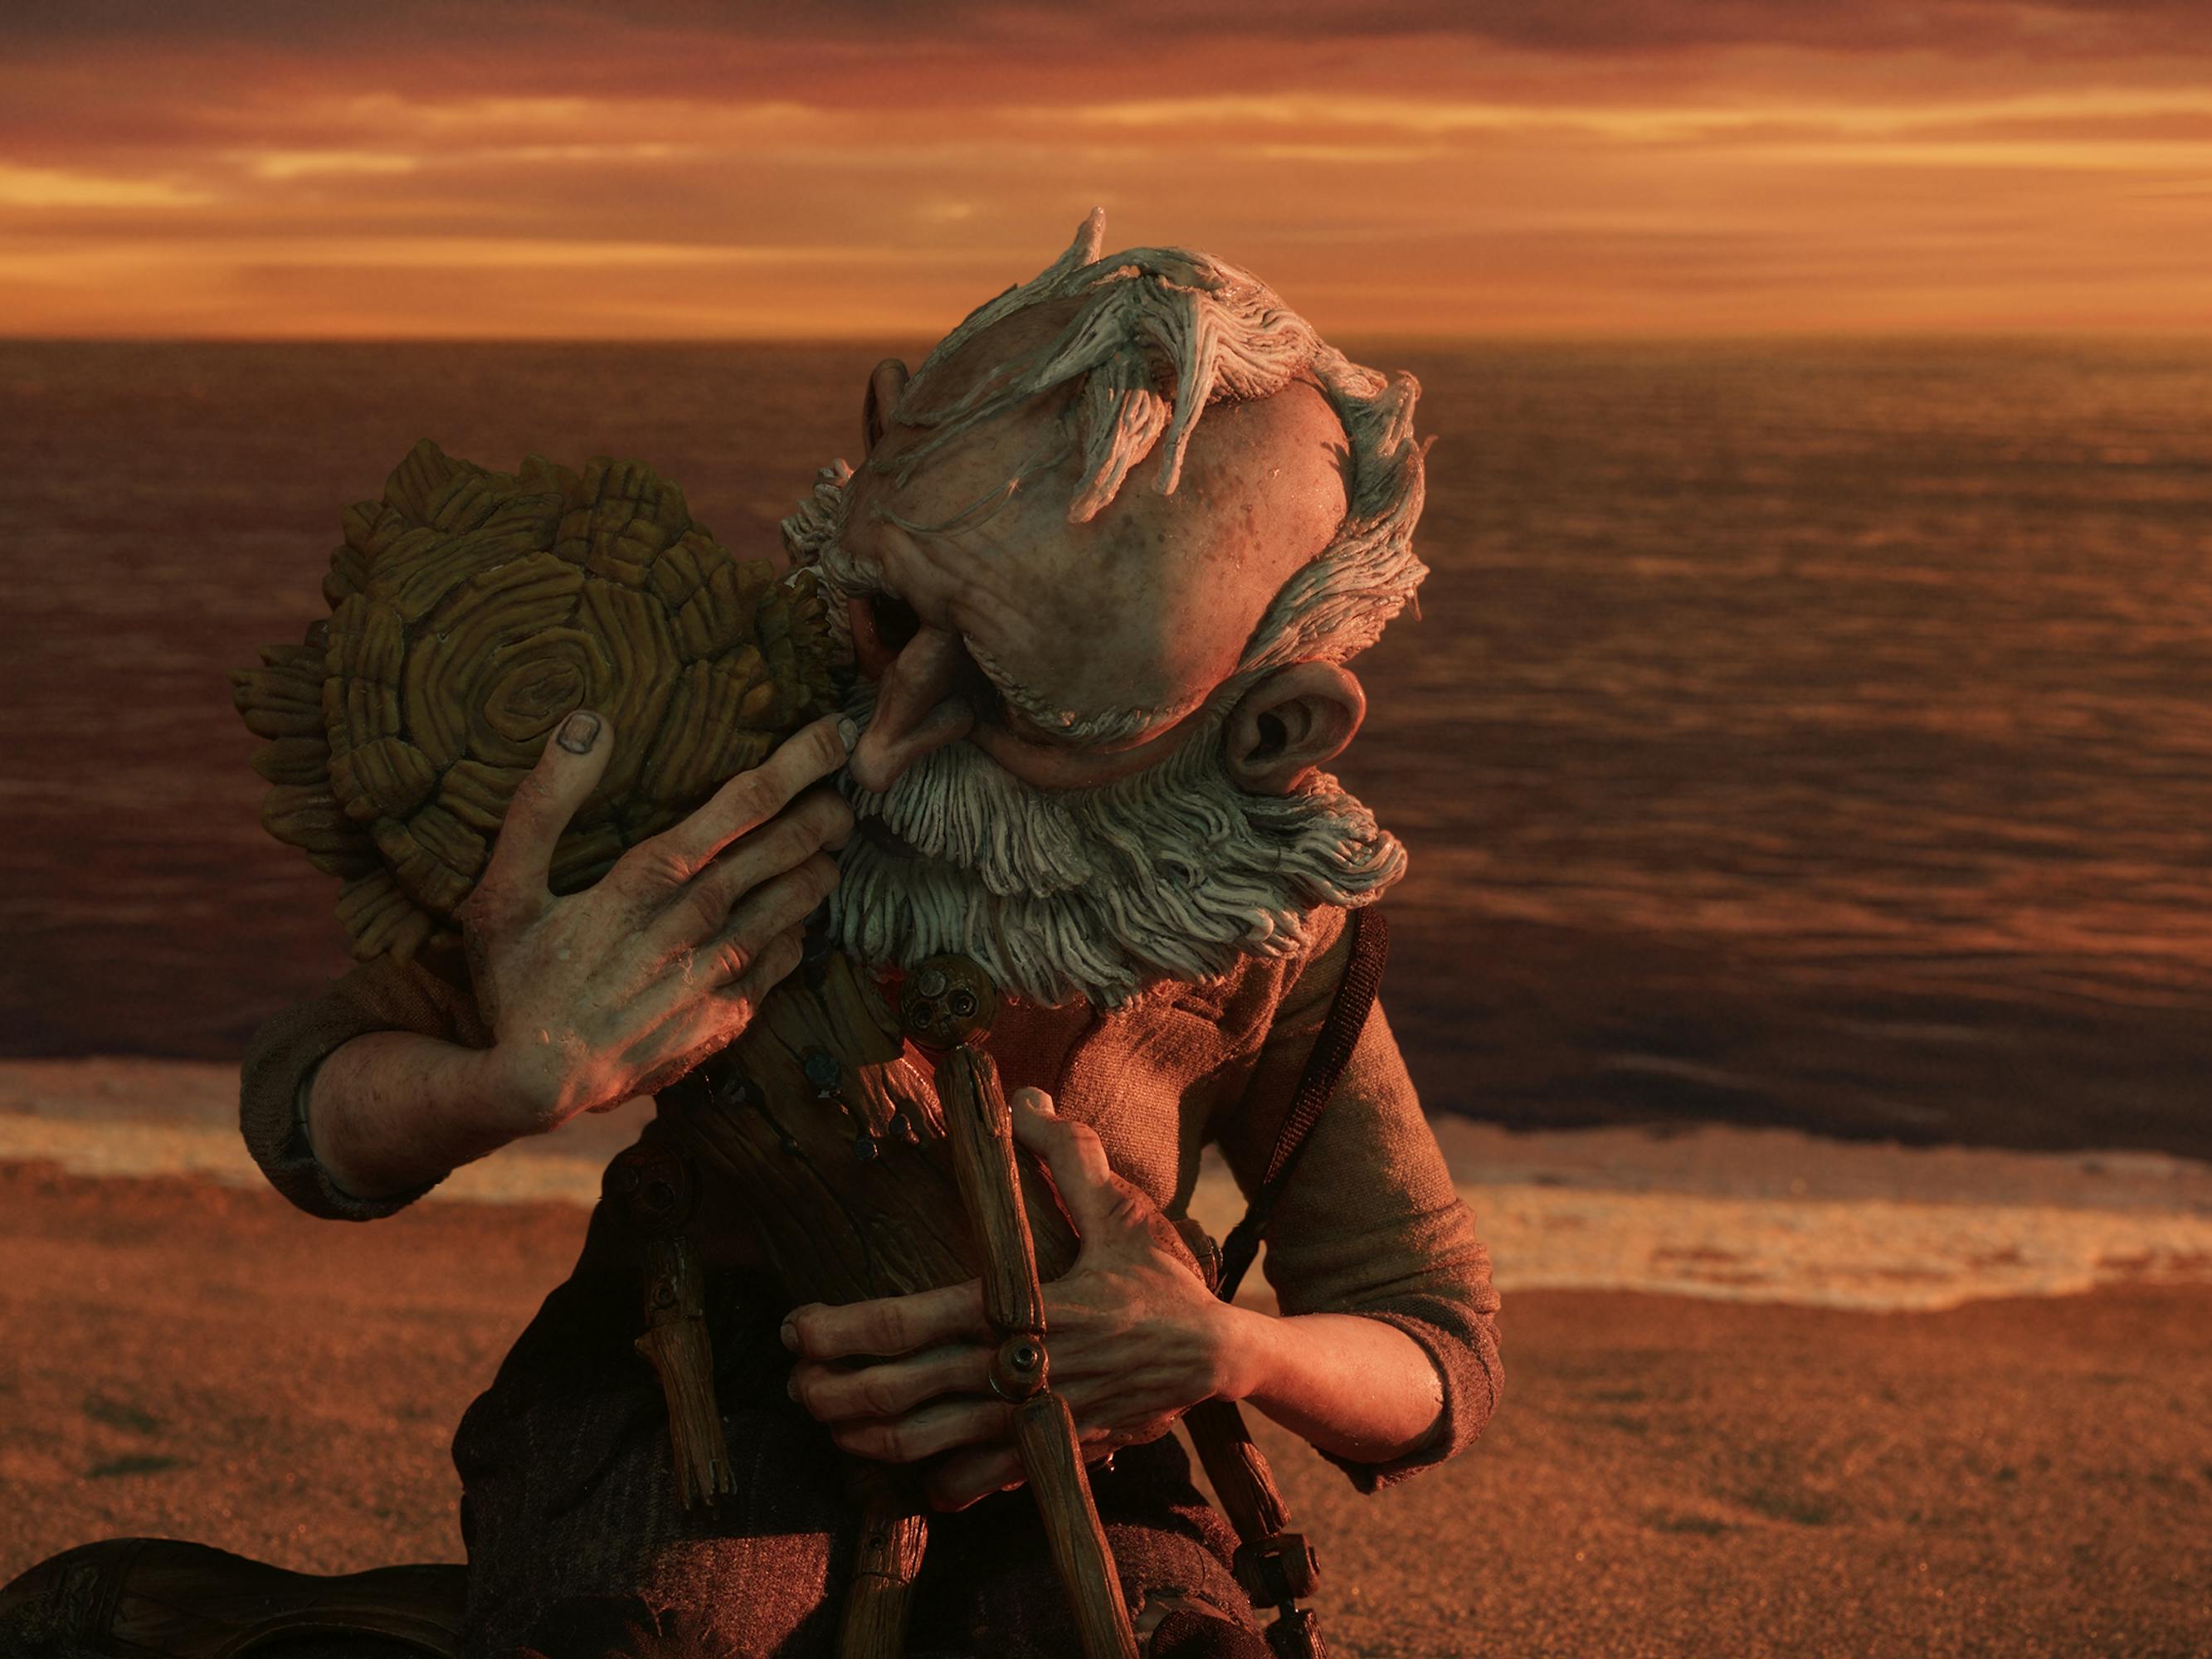 Geppetto (David Bradley) holds Pinocchio (Gregory Mann) in his arms on a sunset-lit beach.